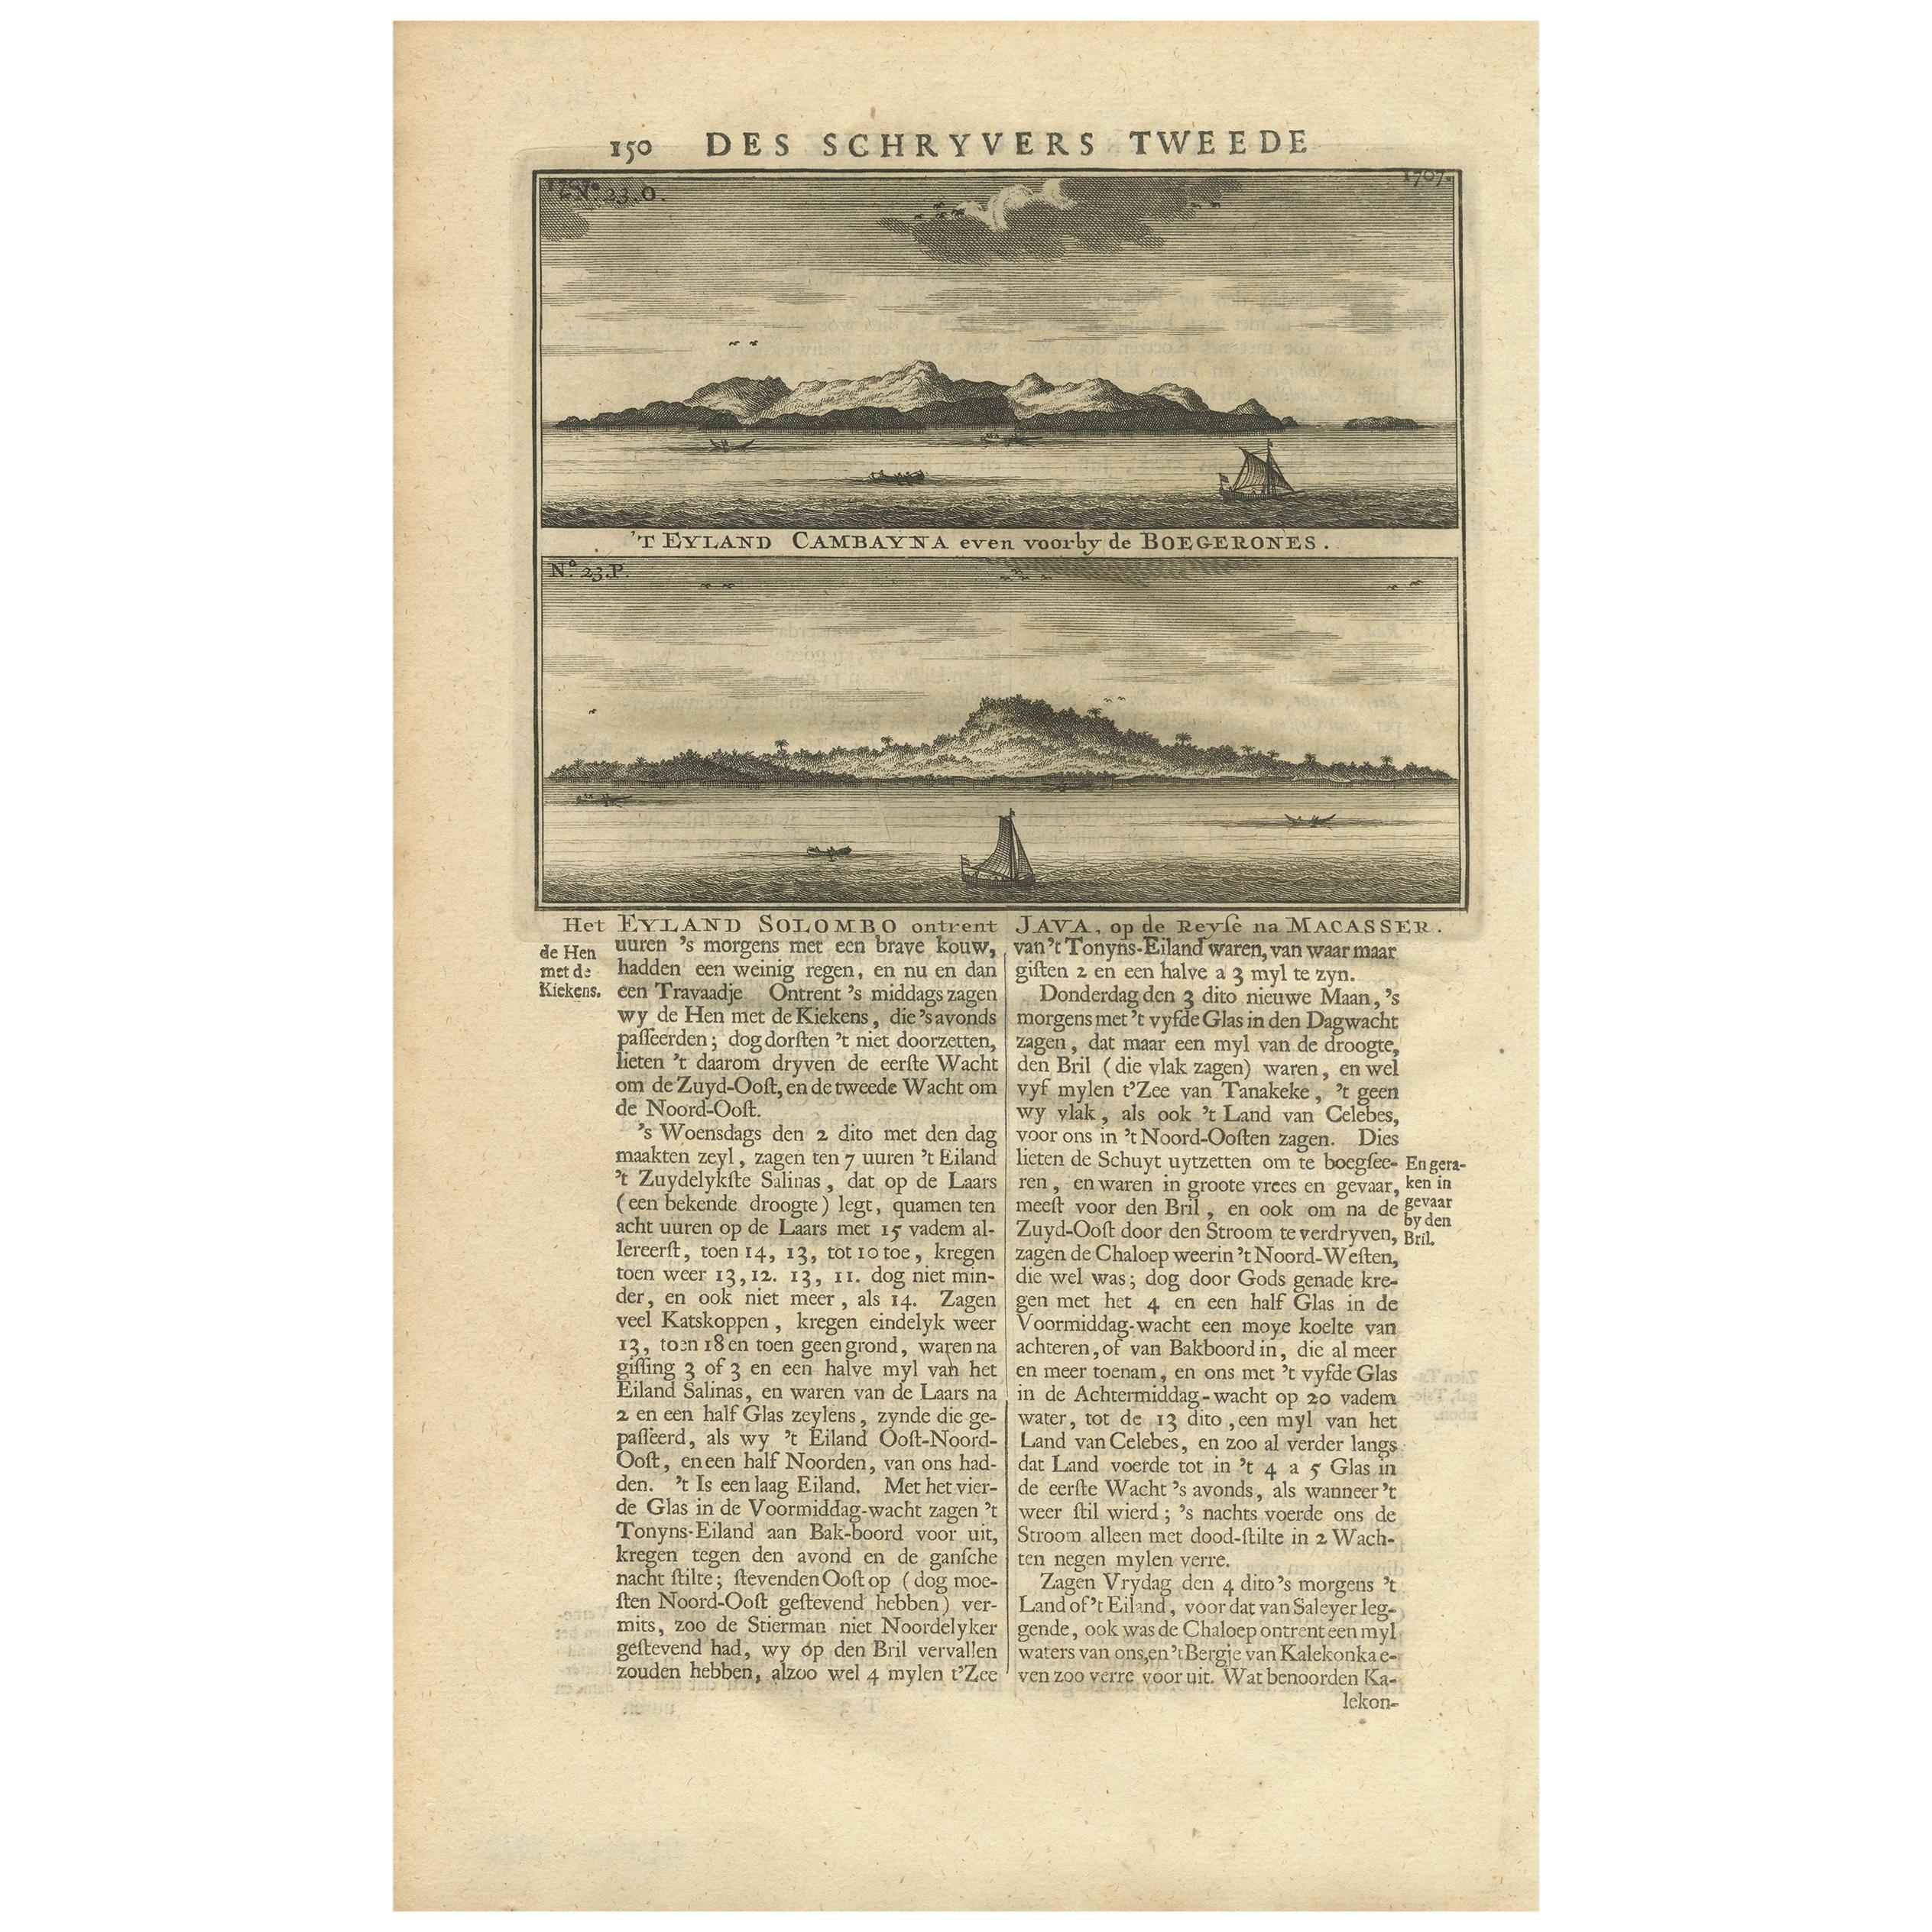 Antique Print of the Islands Cambayna and Solombo by Valentijn, 1726